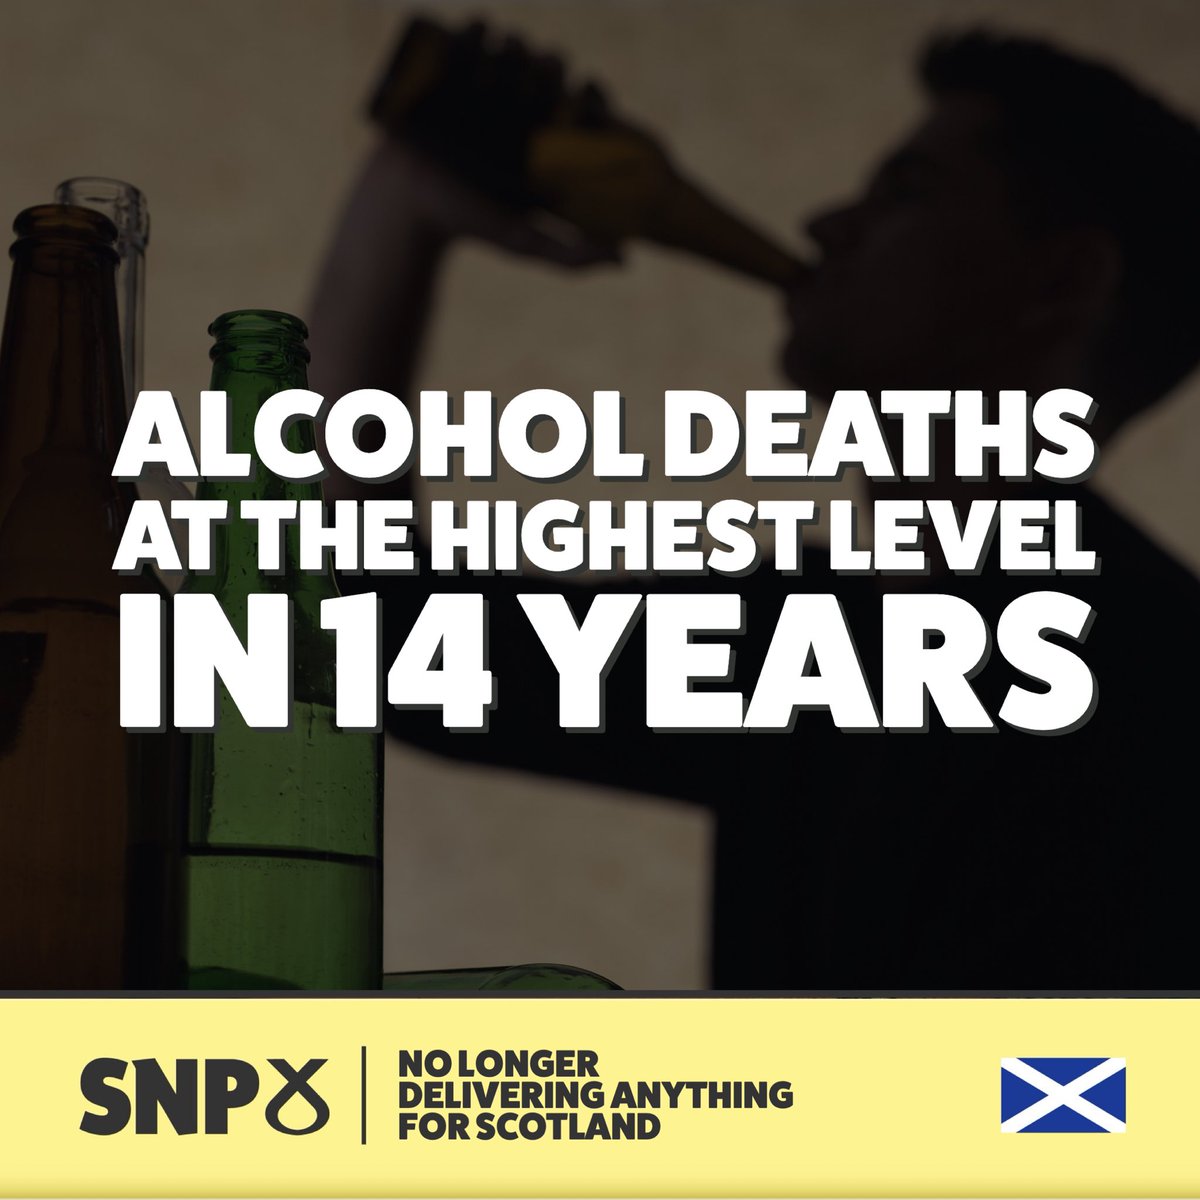 Thanks to our brilliant SNP leadership we have reached new heights! It’s clear that the rise in alcohol deaths in Scotland shows that our world-leading SNP approach to reducing alcohol deaths is extremely succes… oh. Hmm… I may need to talk to Humza about this one.